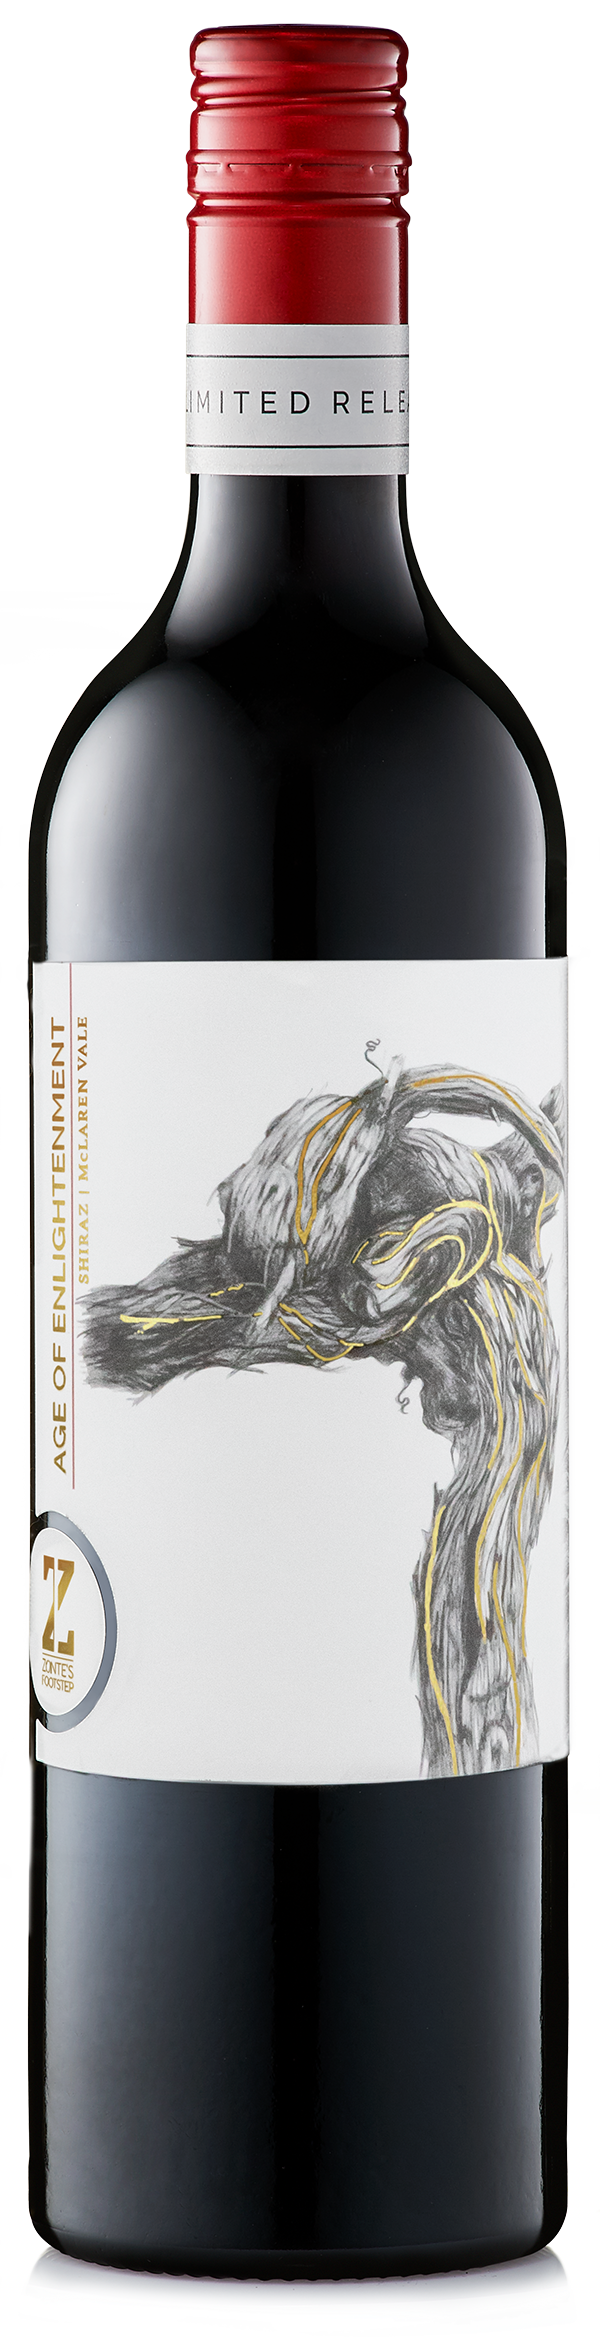 Zonte’s Footstep Age of Enlightenment Shiraz 2018